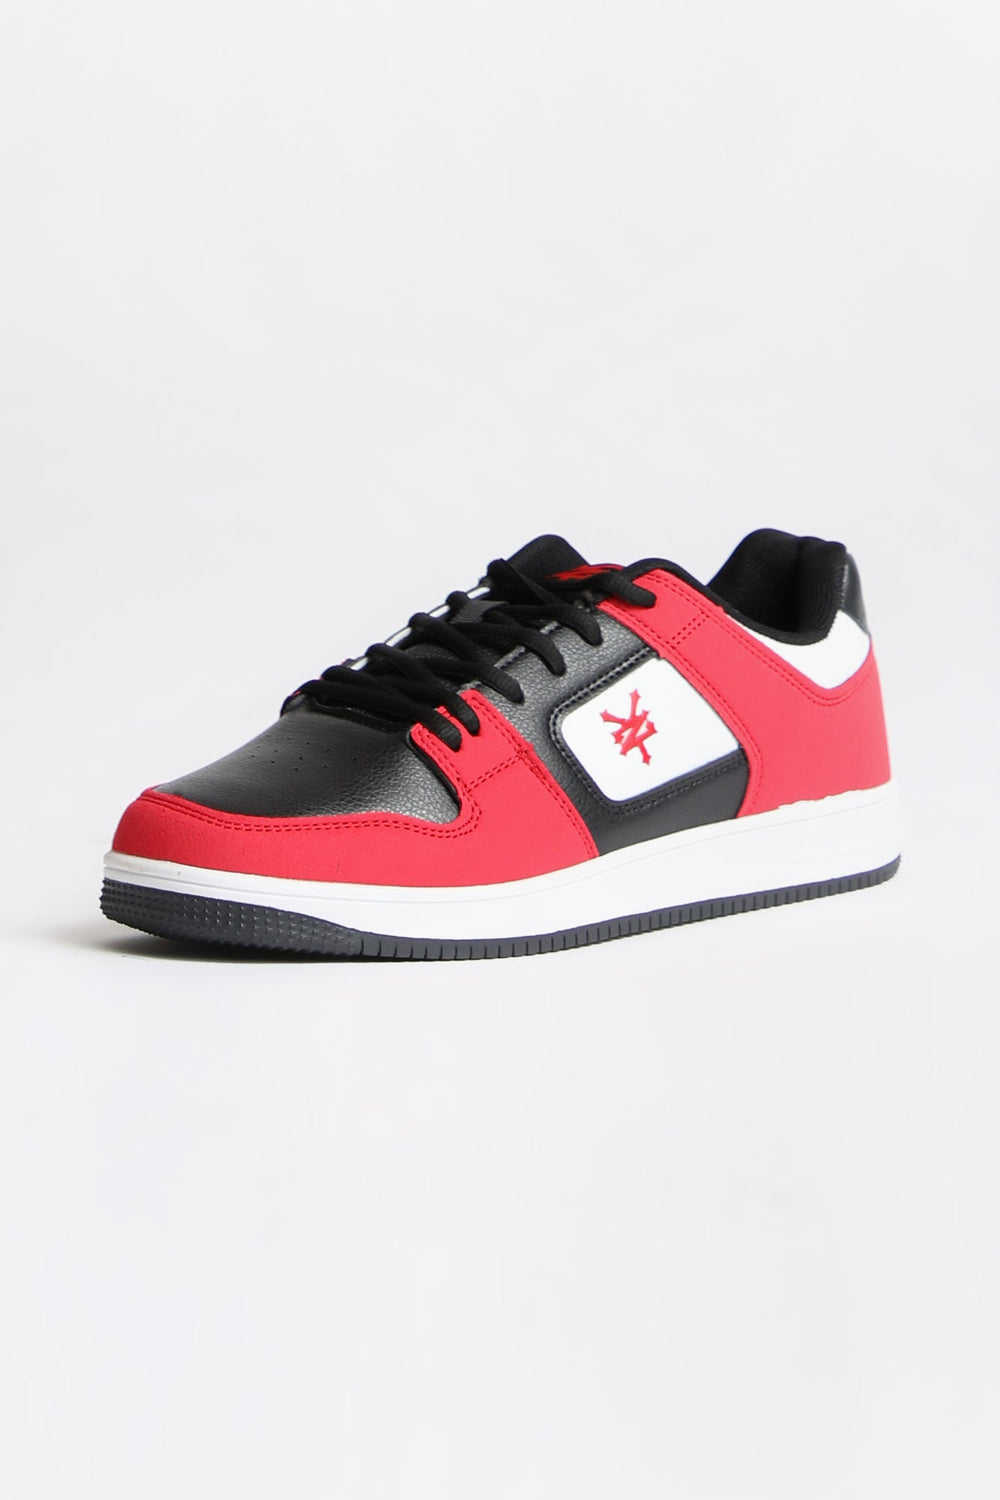 Chaussures de Skate Zoo York Homme Chaussures de Skate Zoo York Homme